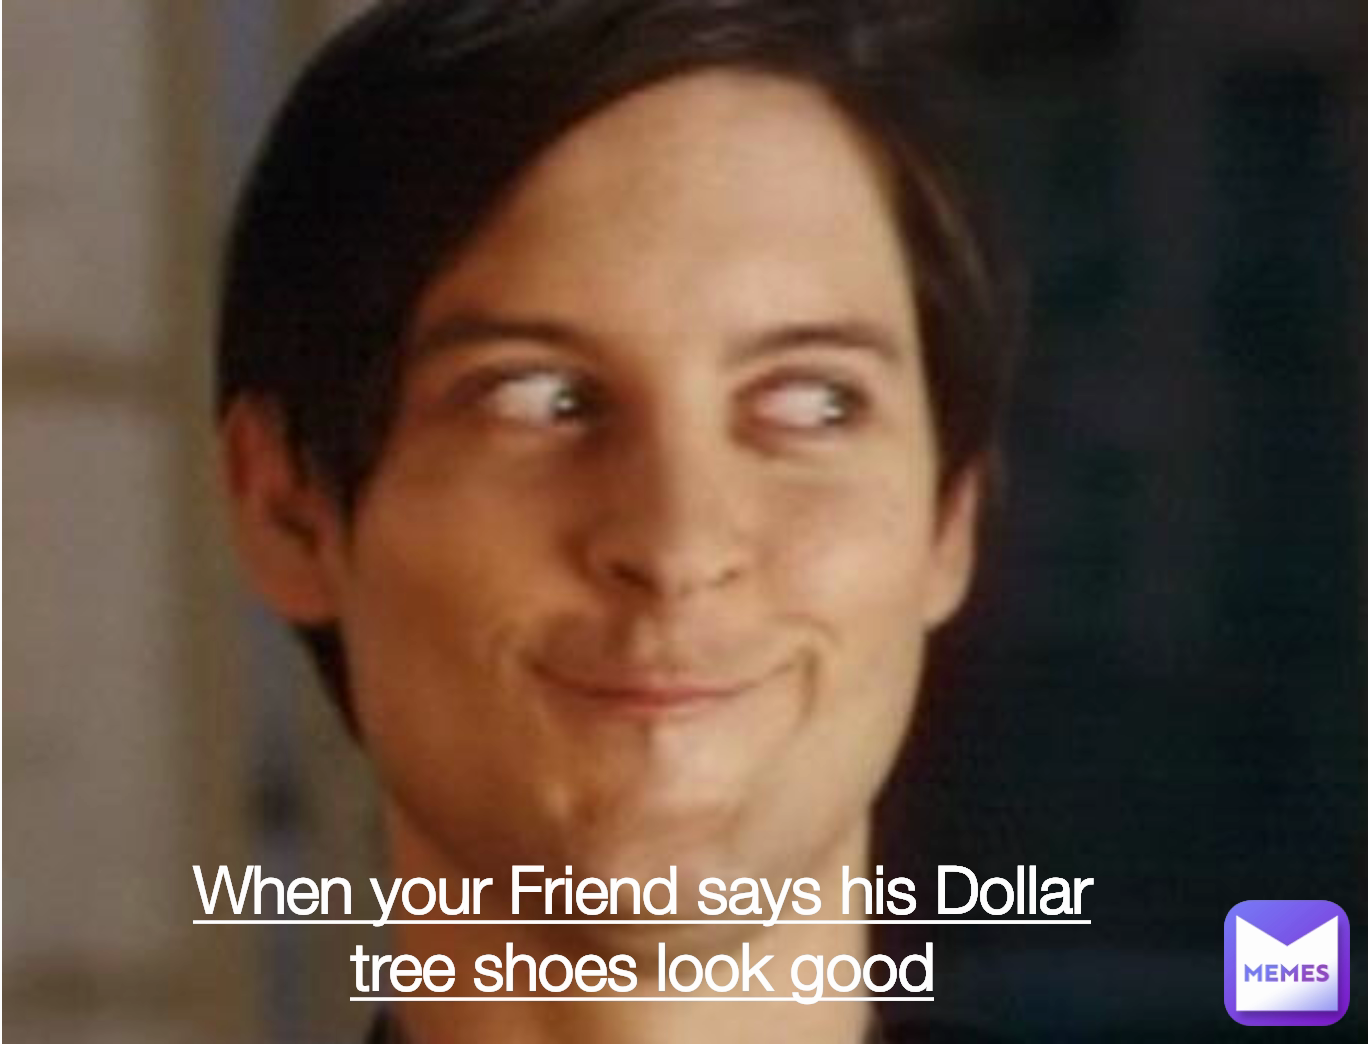 When your Friend says his Dollar tree shoes look good